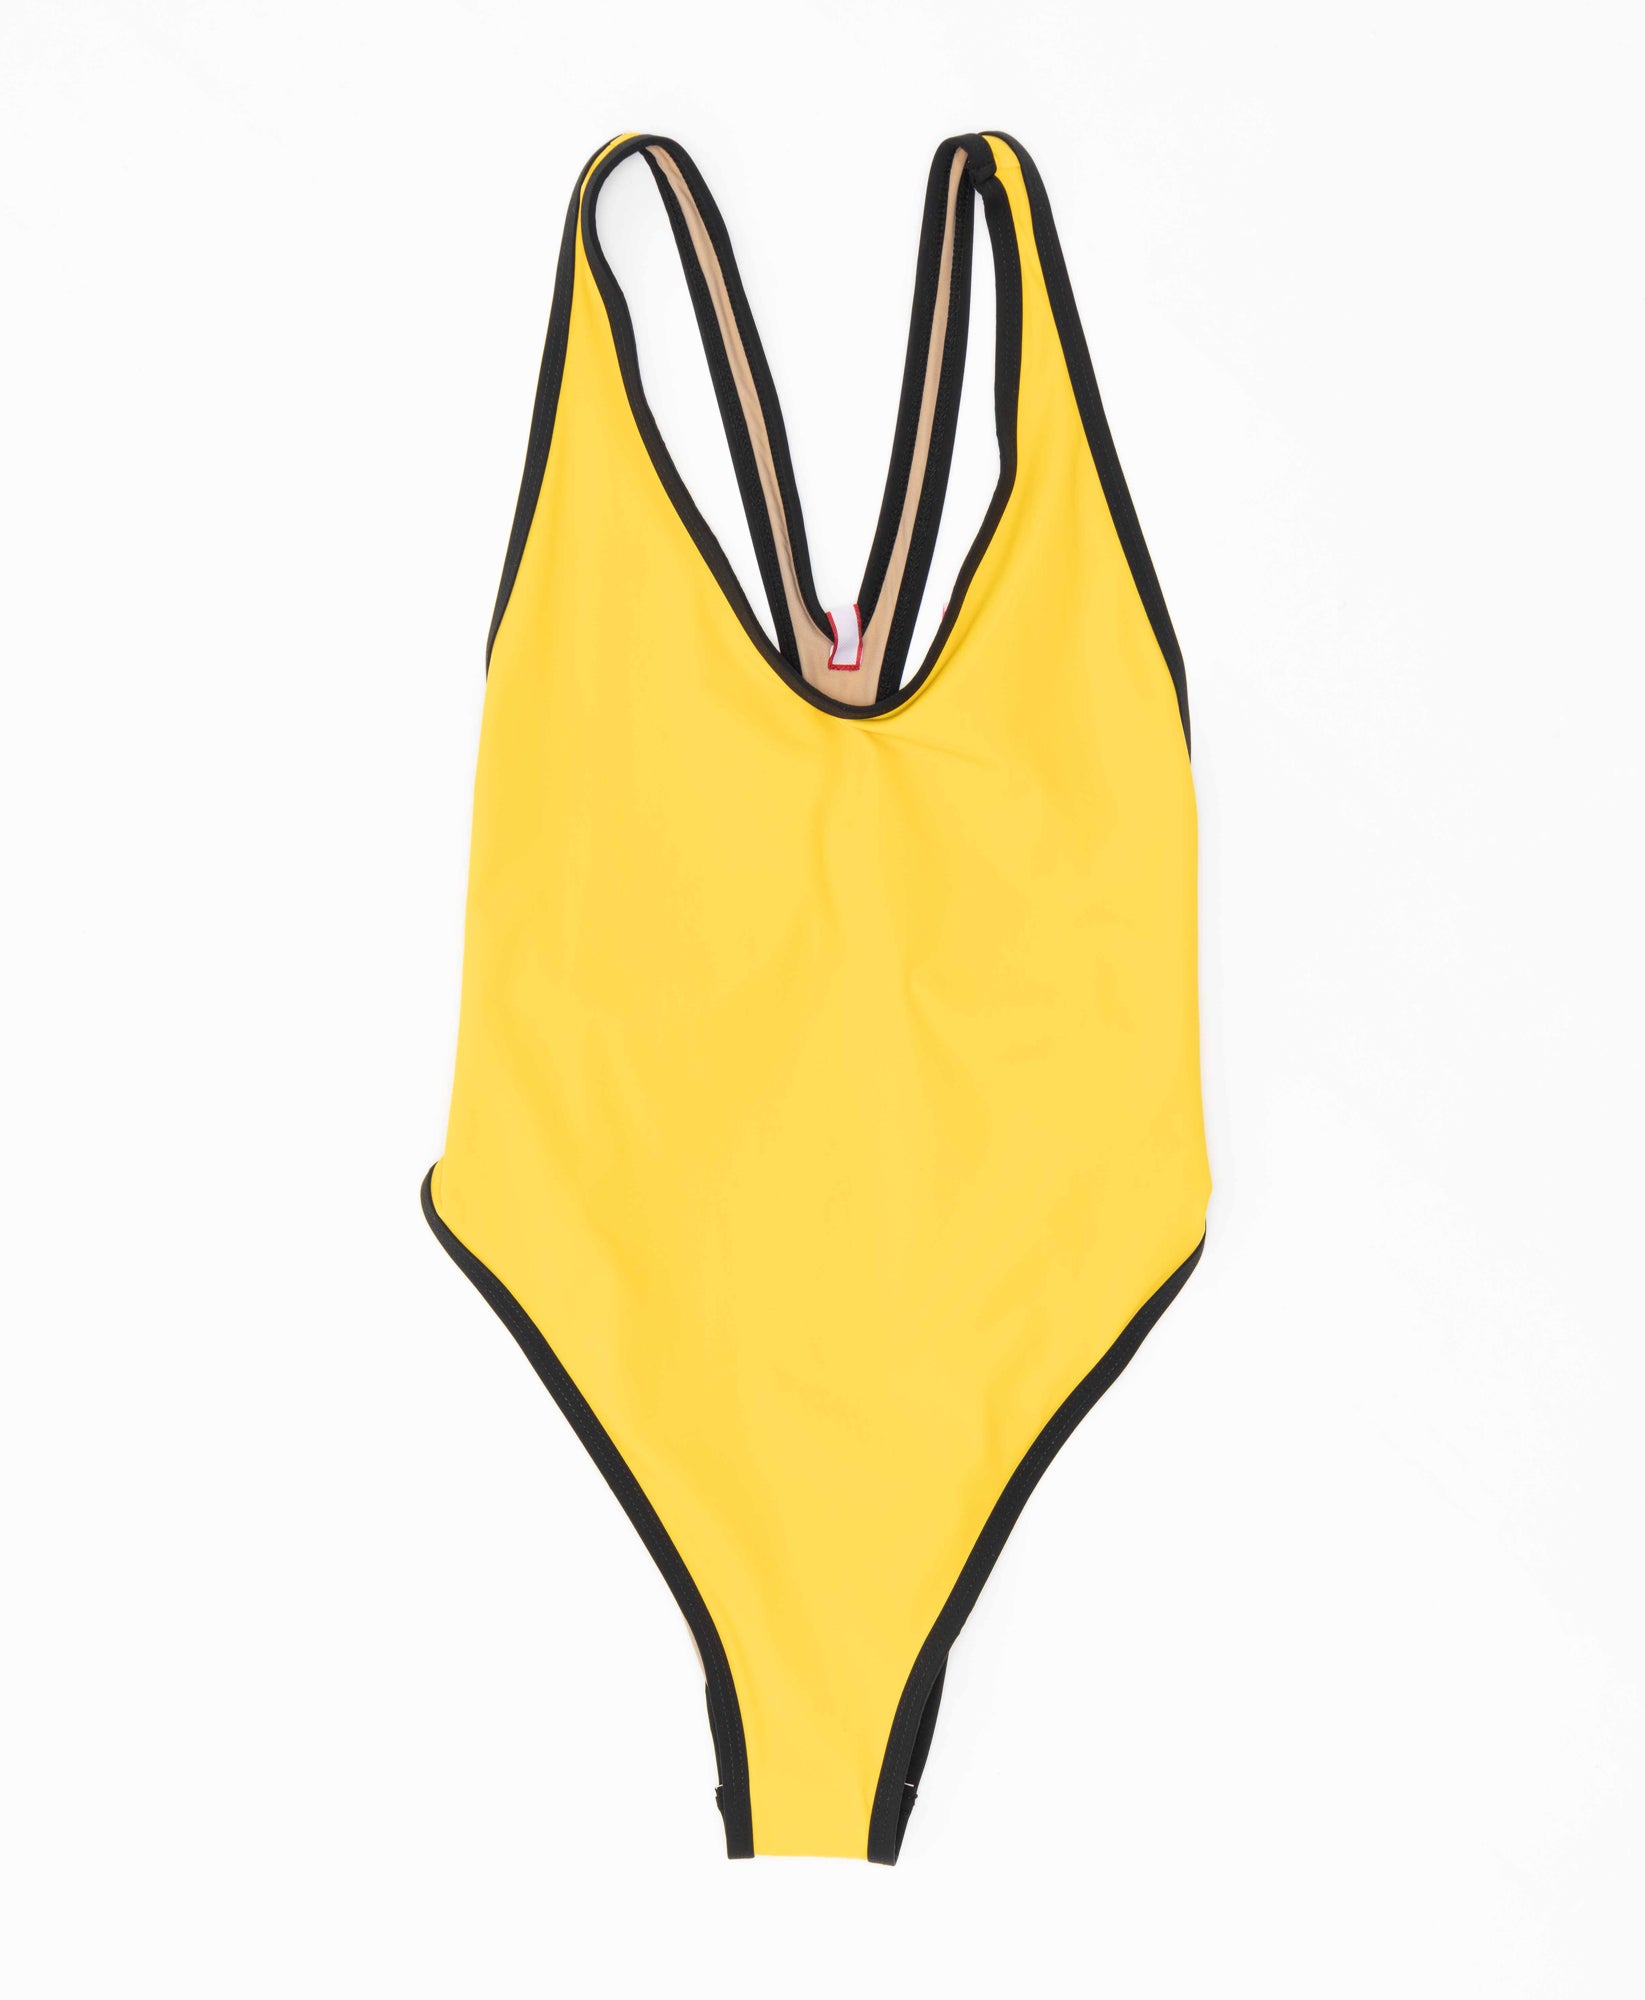 Wear One's At Star Island One Piece Swimsuit in Yellow on Two Models Front View